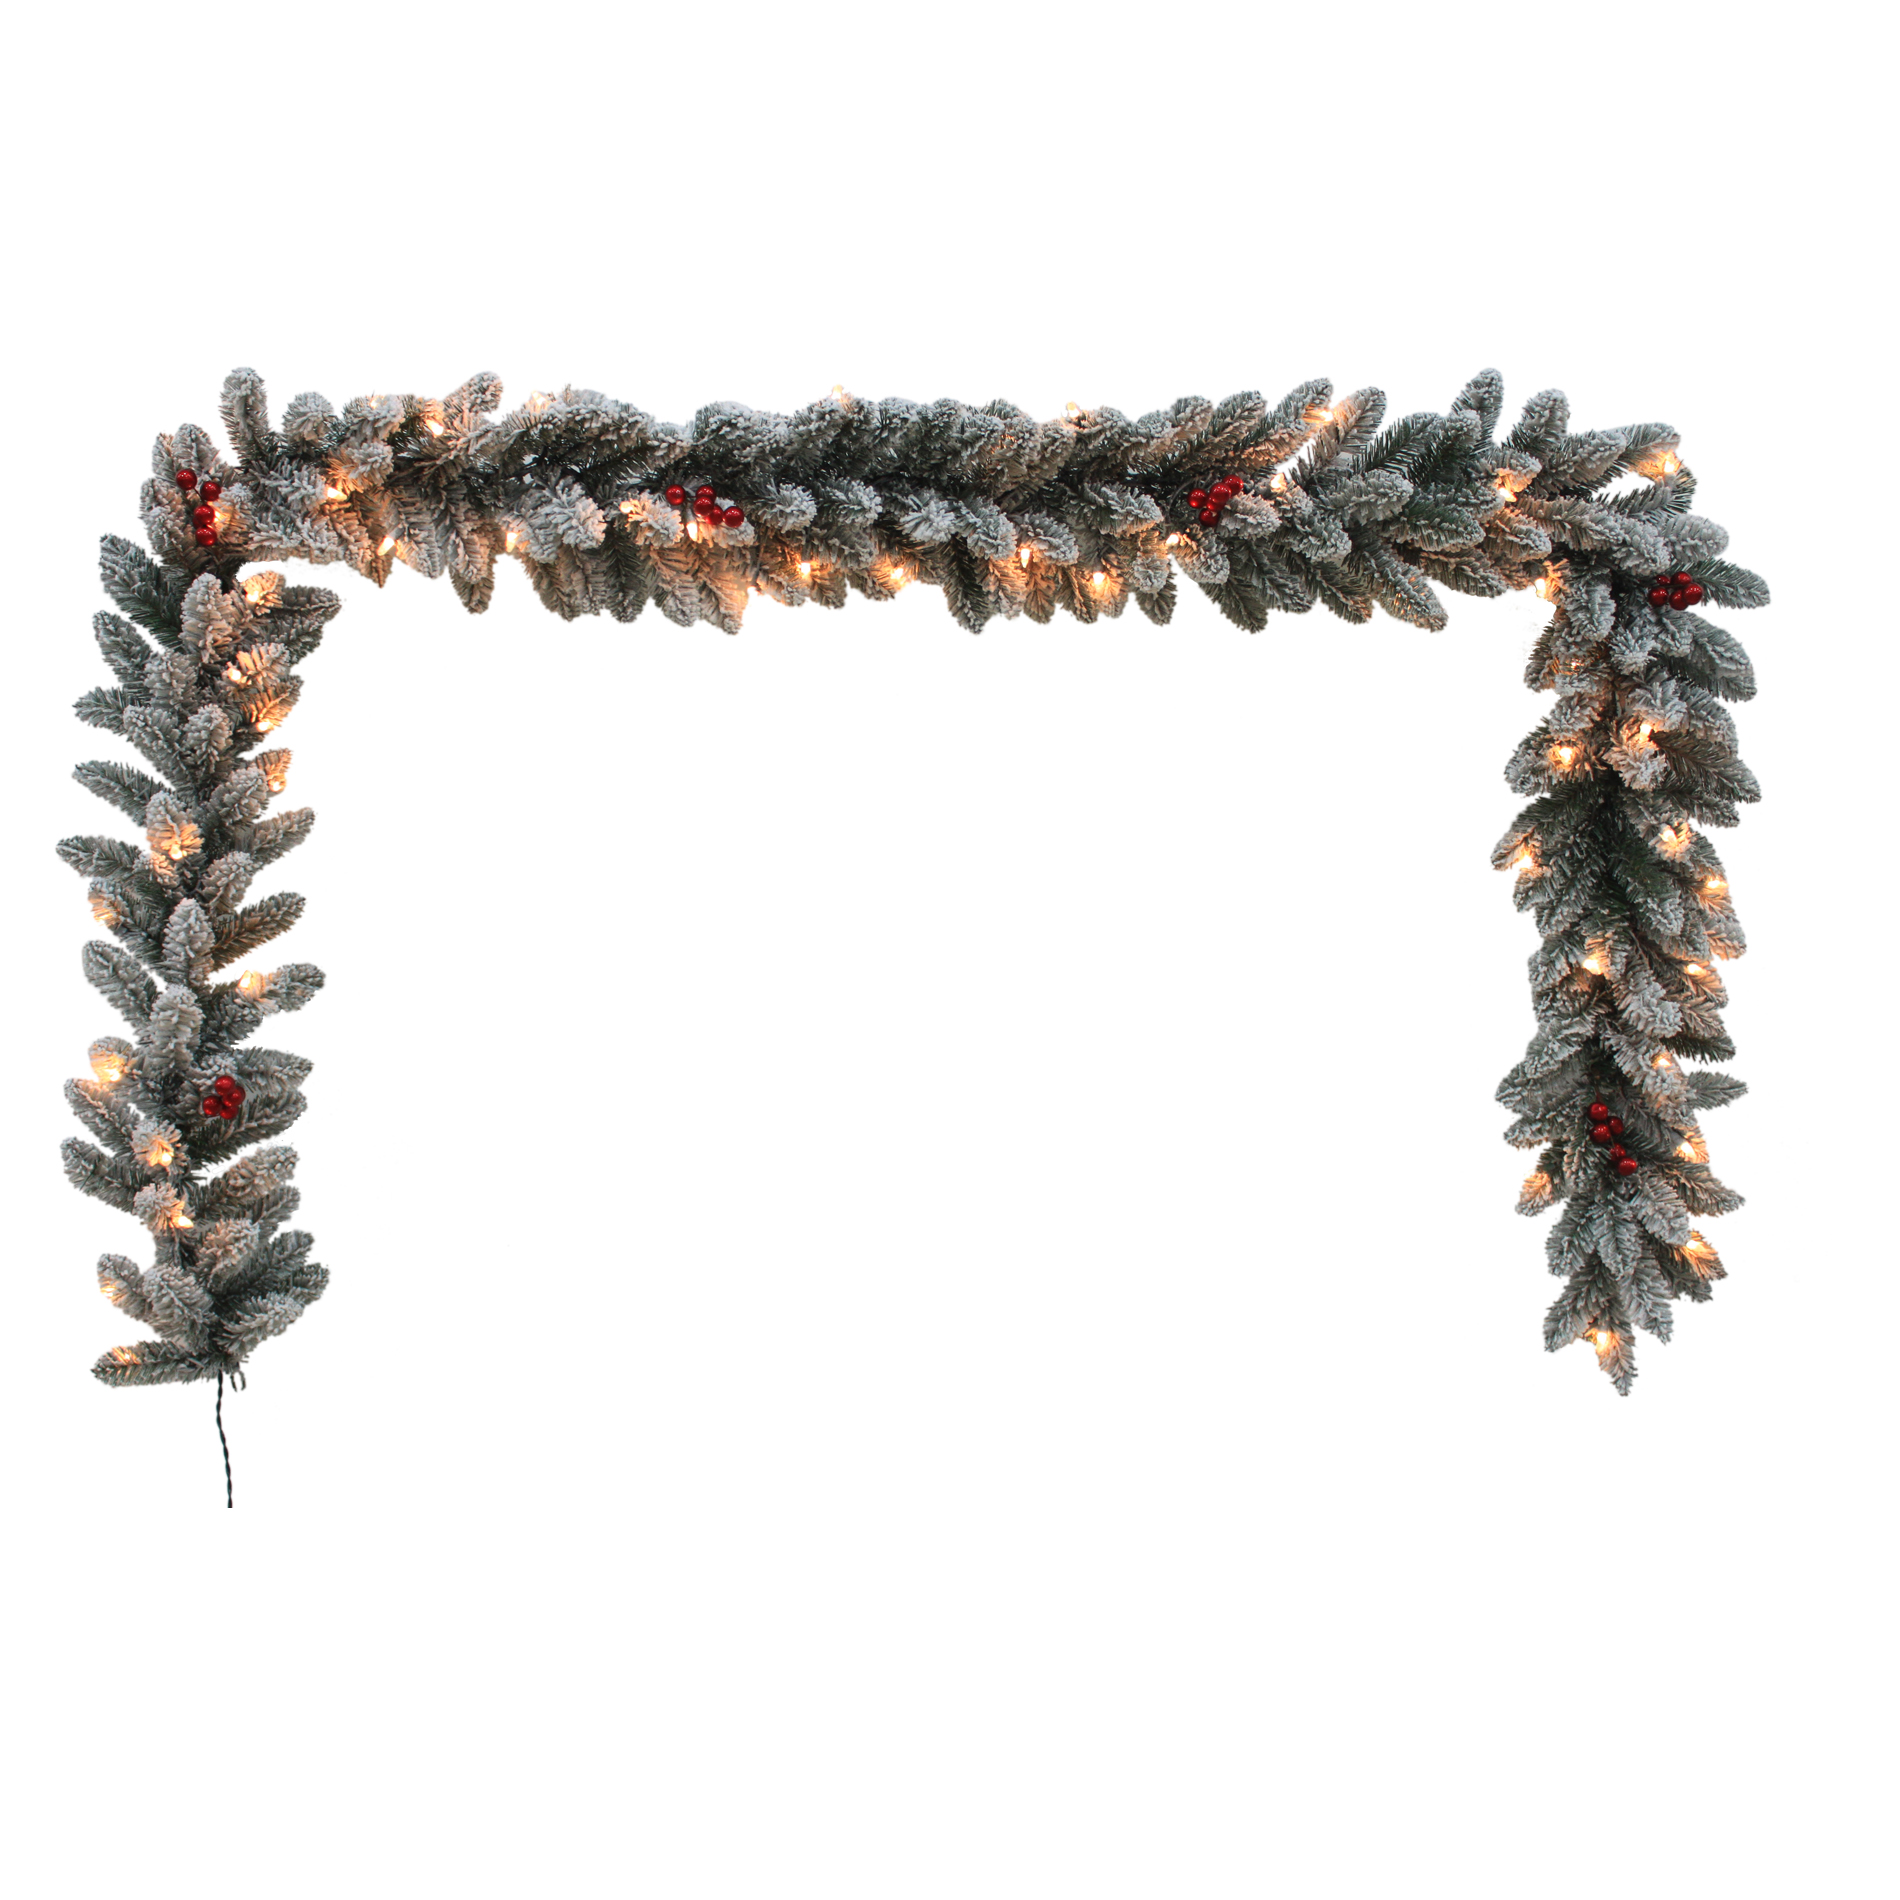 Trimming Traditions 9ft Barrydale Flocked Pine Garland